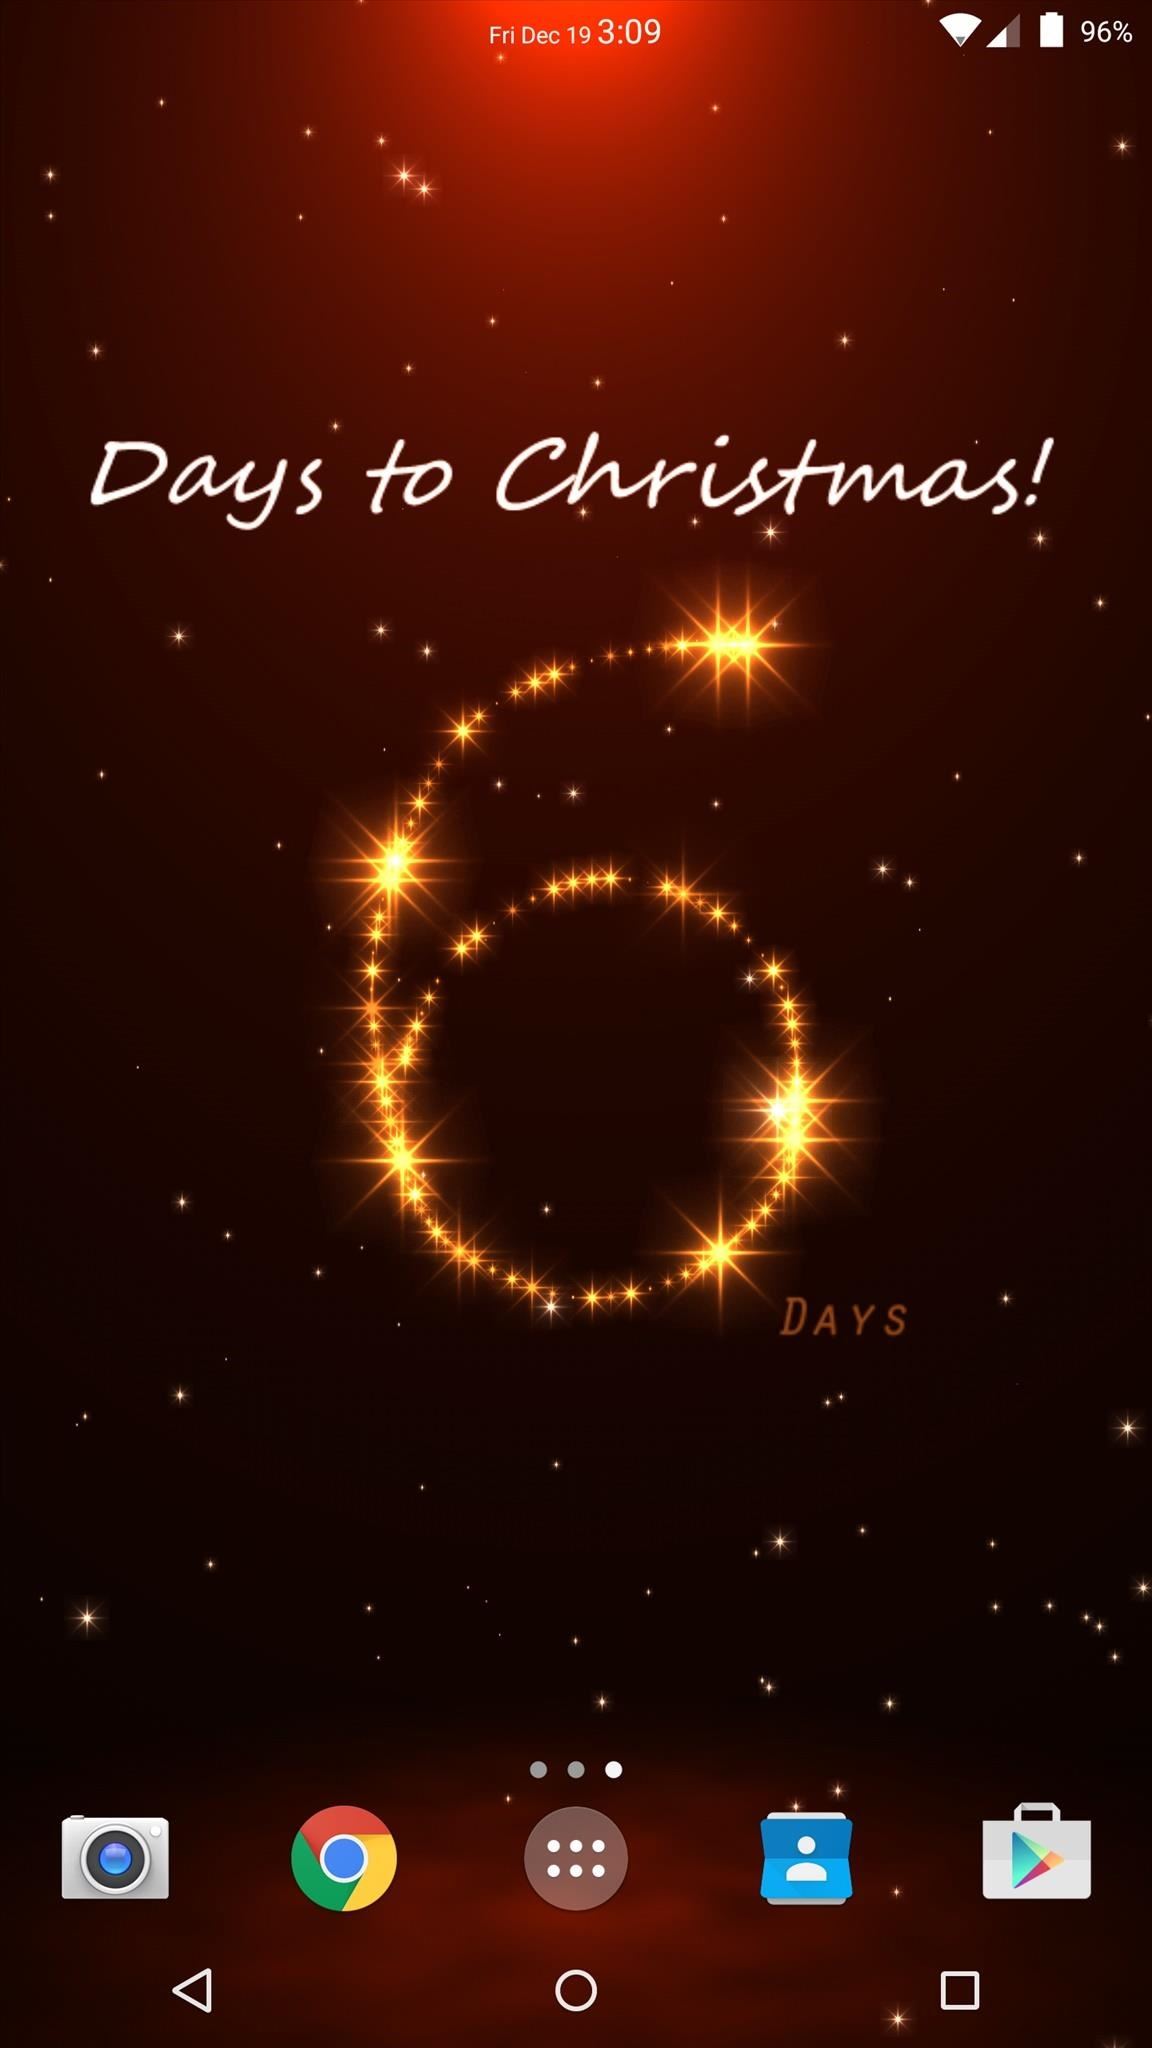 Turn Your Android S Wallpaper Into A Christmas New Year S Countdown Clock Android Gadget Hacks